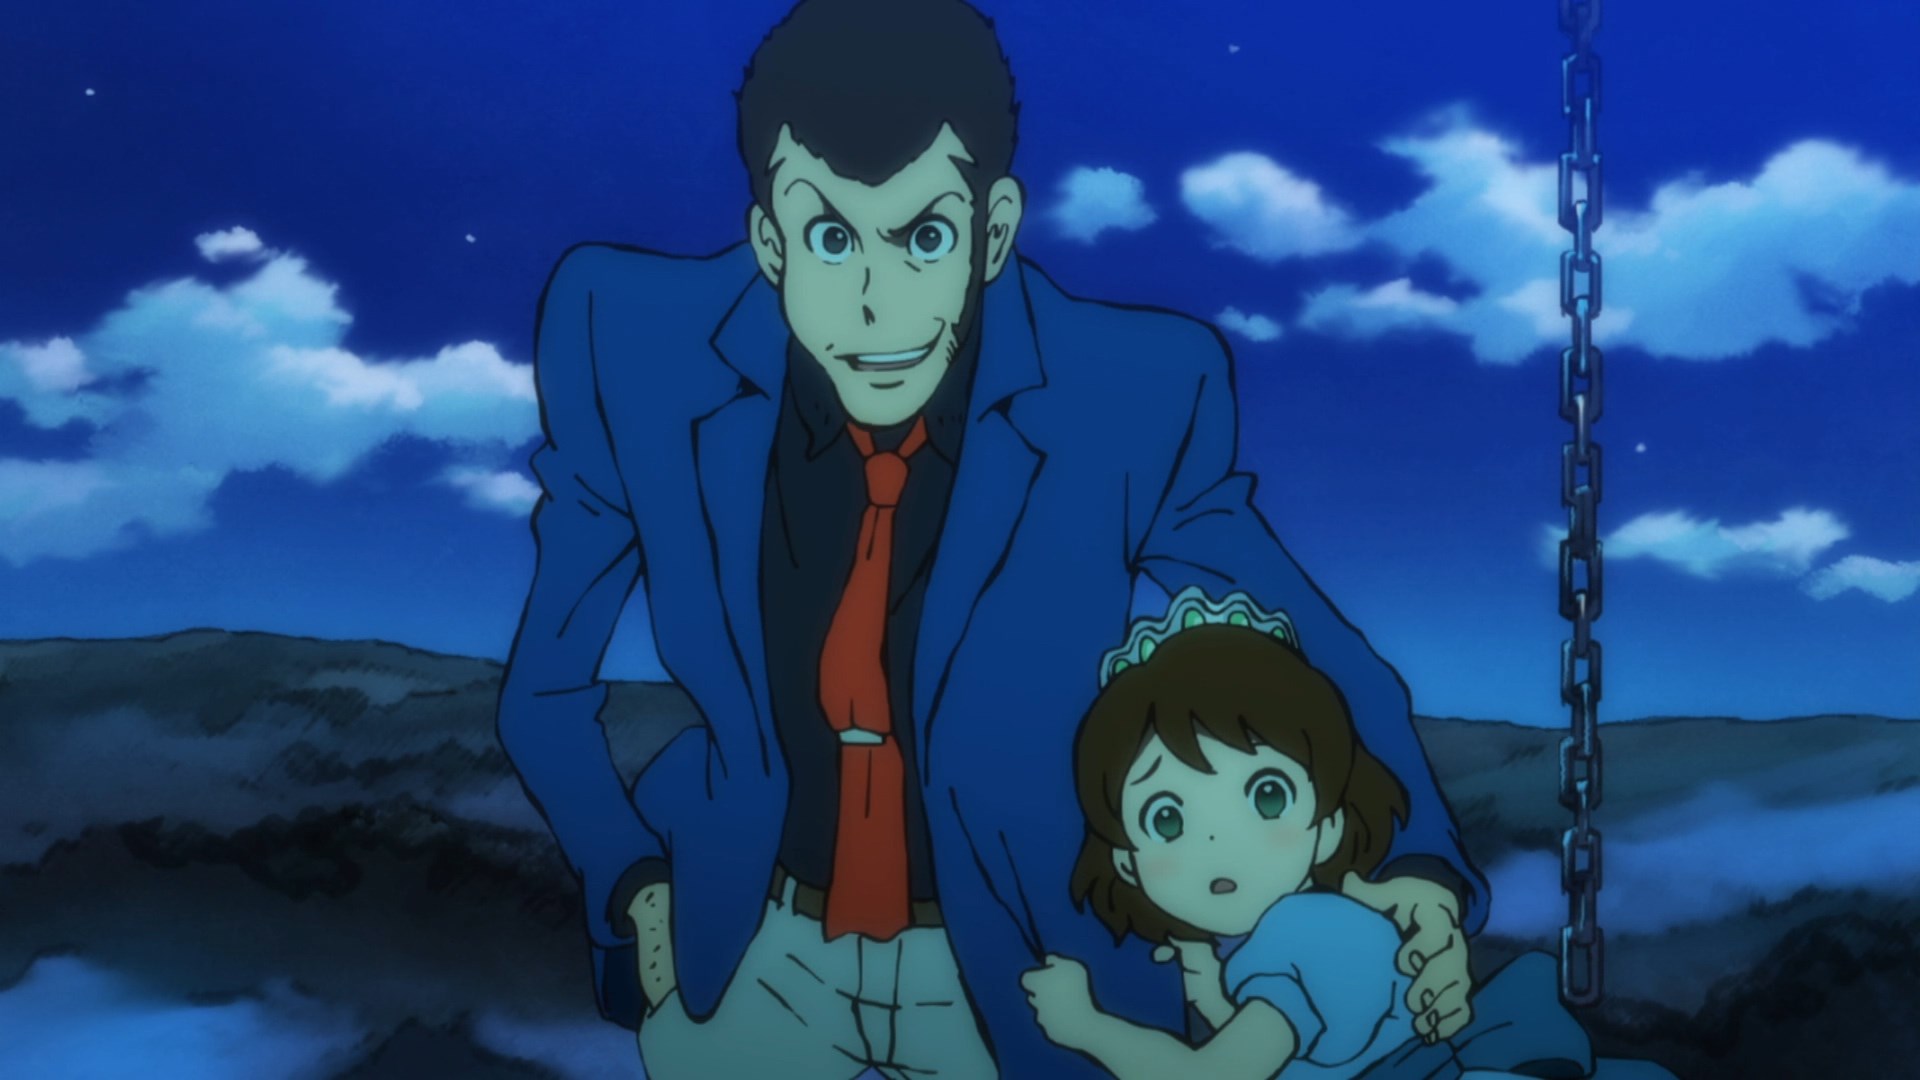 Lupin III: Dead or Alive Review - AstroNerdBoy's Anime & Manga